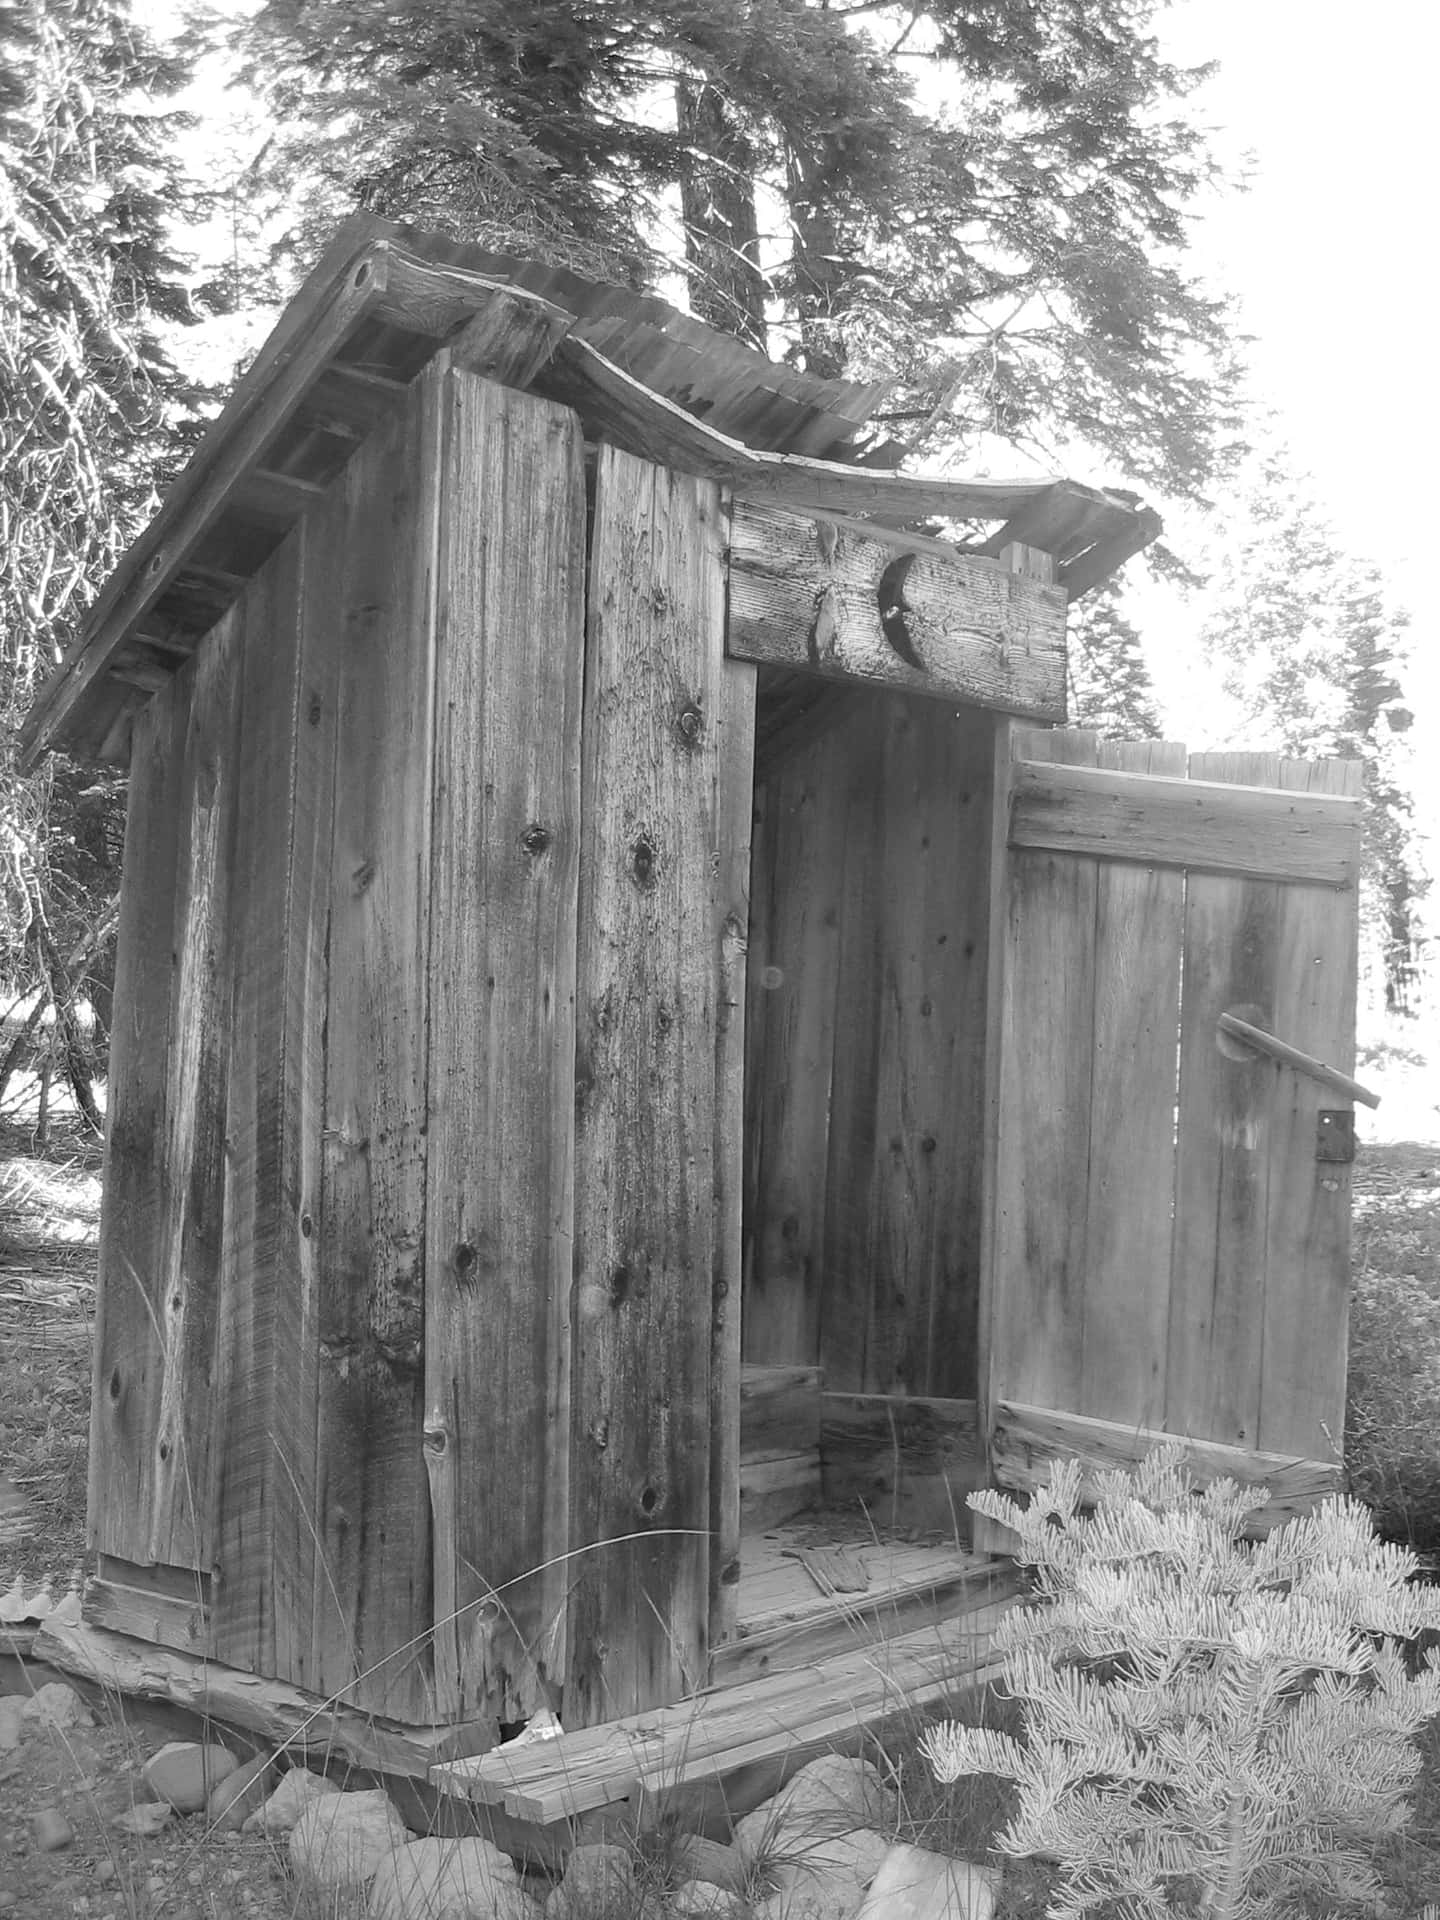 A peaceful Outhouse nestled in a rural countryside